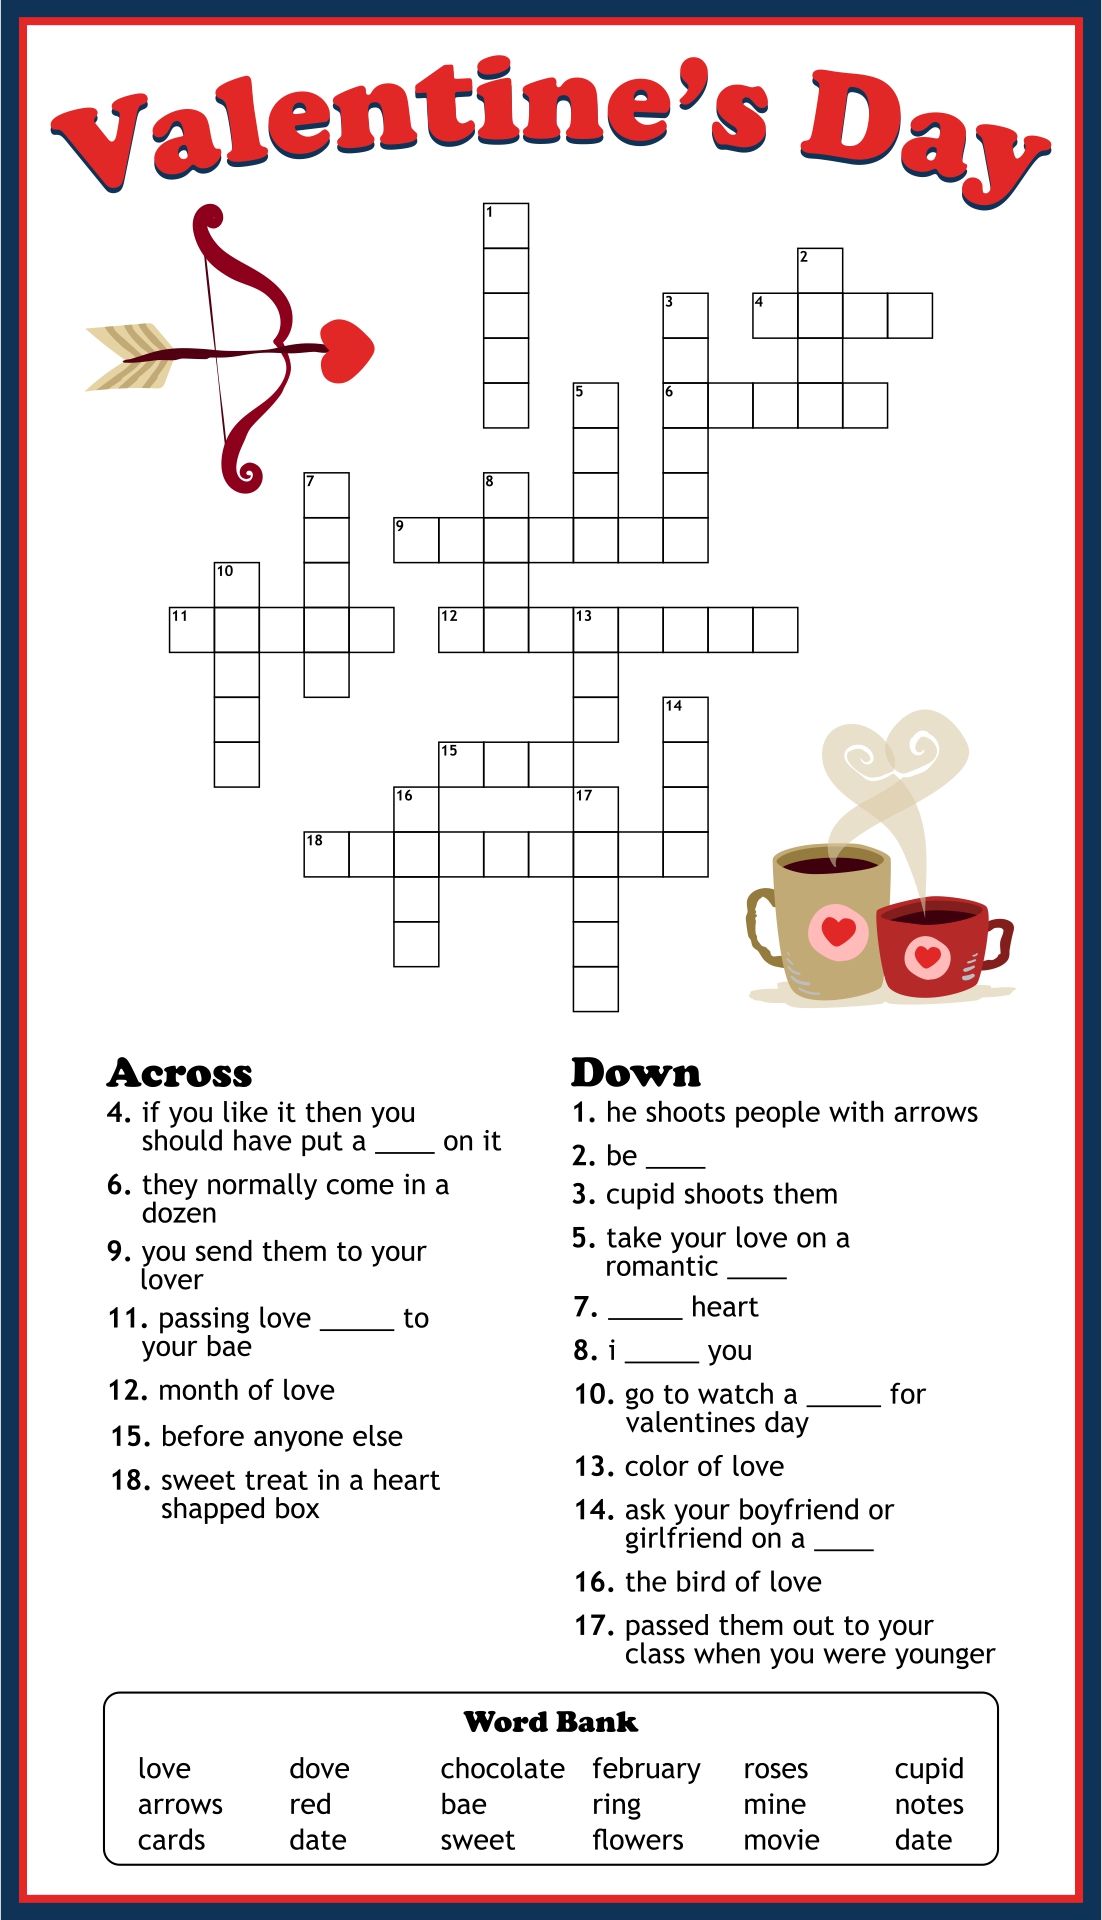 7-best-images-of-valentine-s-day-printable-puzzles-free-printable